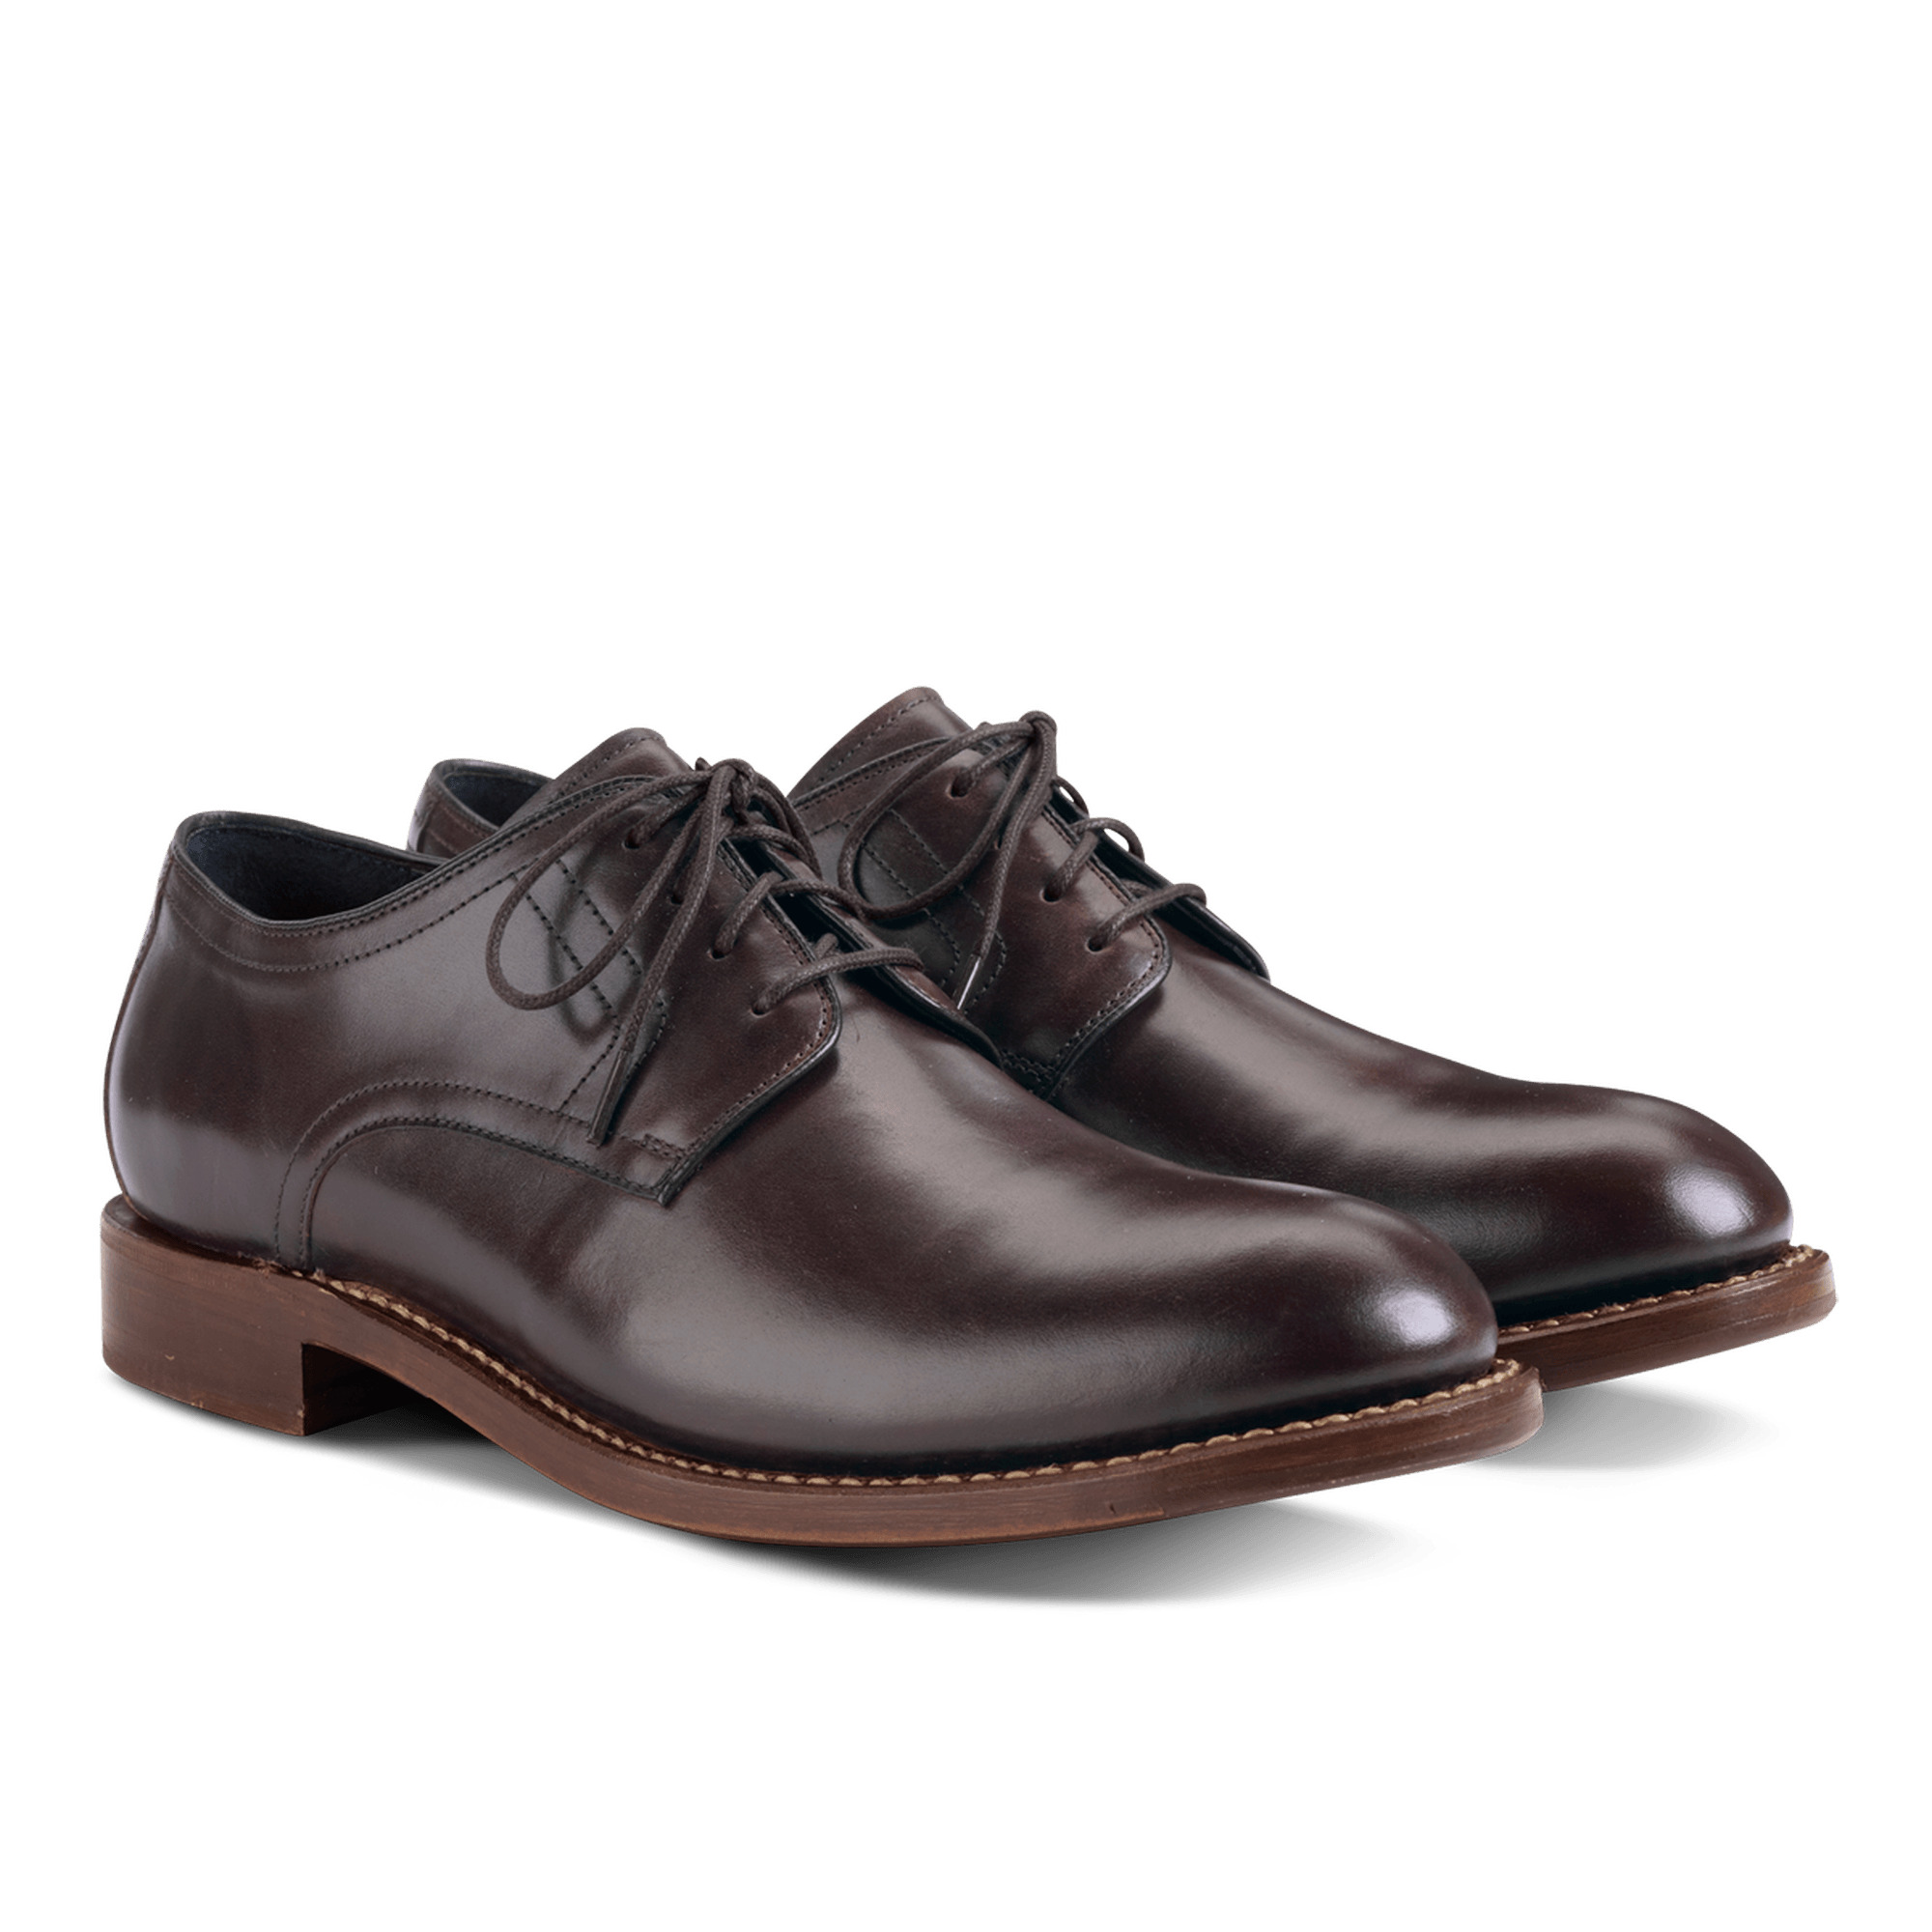 Pair Of Brown Leather Men Shoes icons